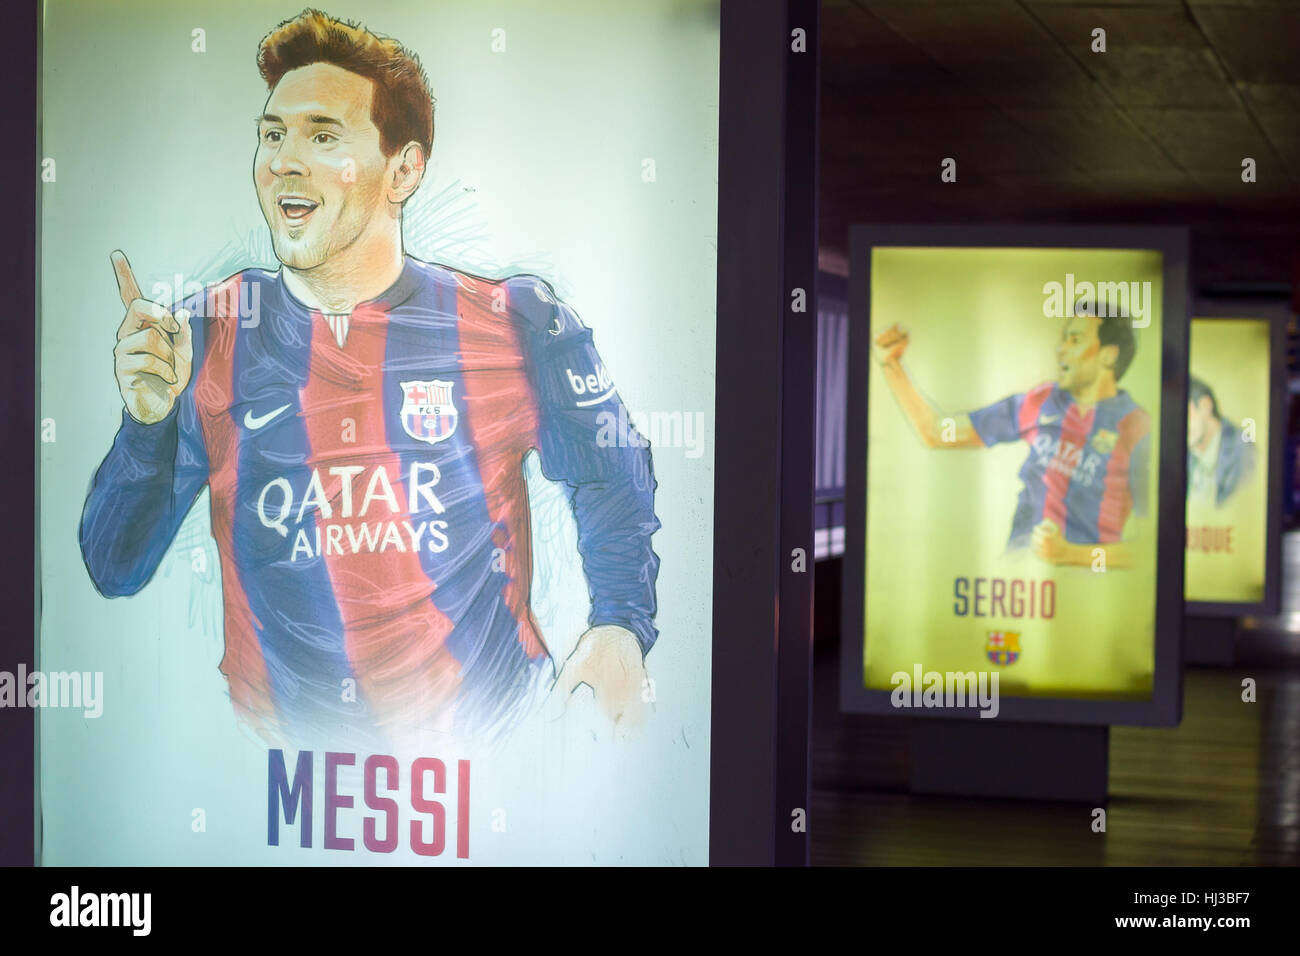 Barcelona, Spain - September 22, 2014: Hand-drawn footballers posters at the museum FC Barcelona. Lionel Messi. Nou Camp, Barcelona, Catalonia, Spain Stock Photo